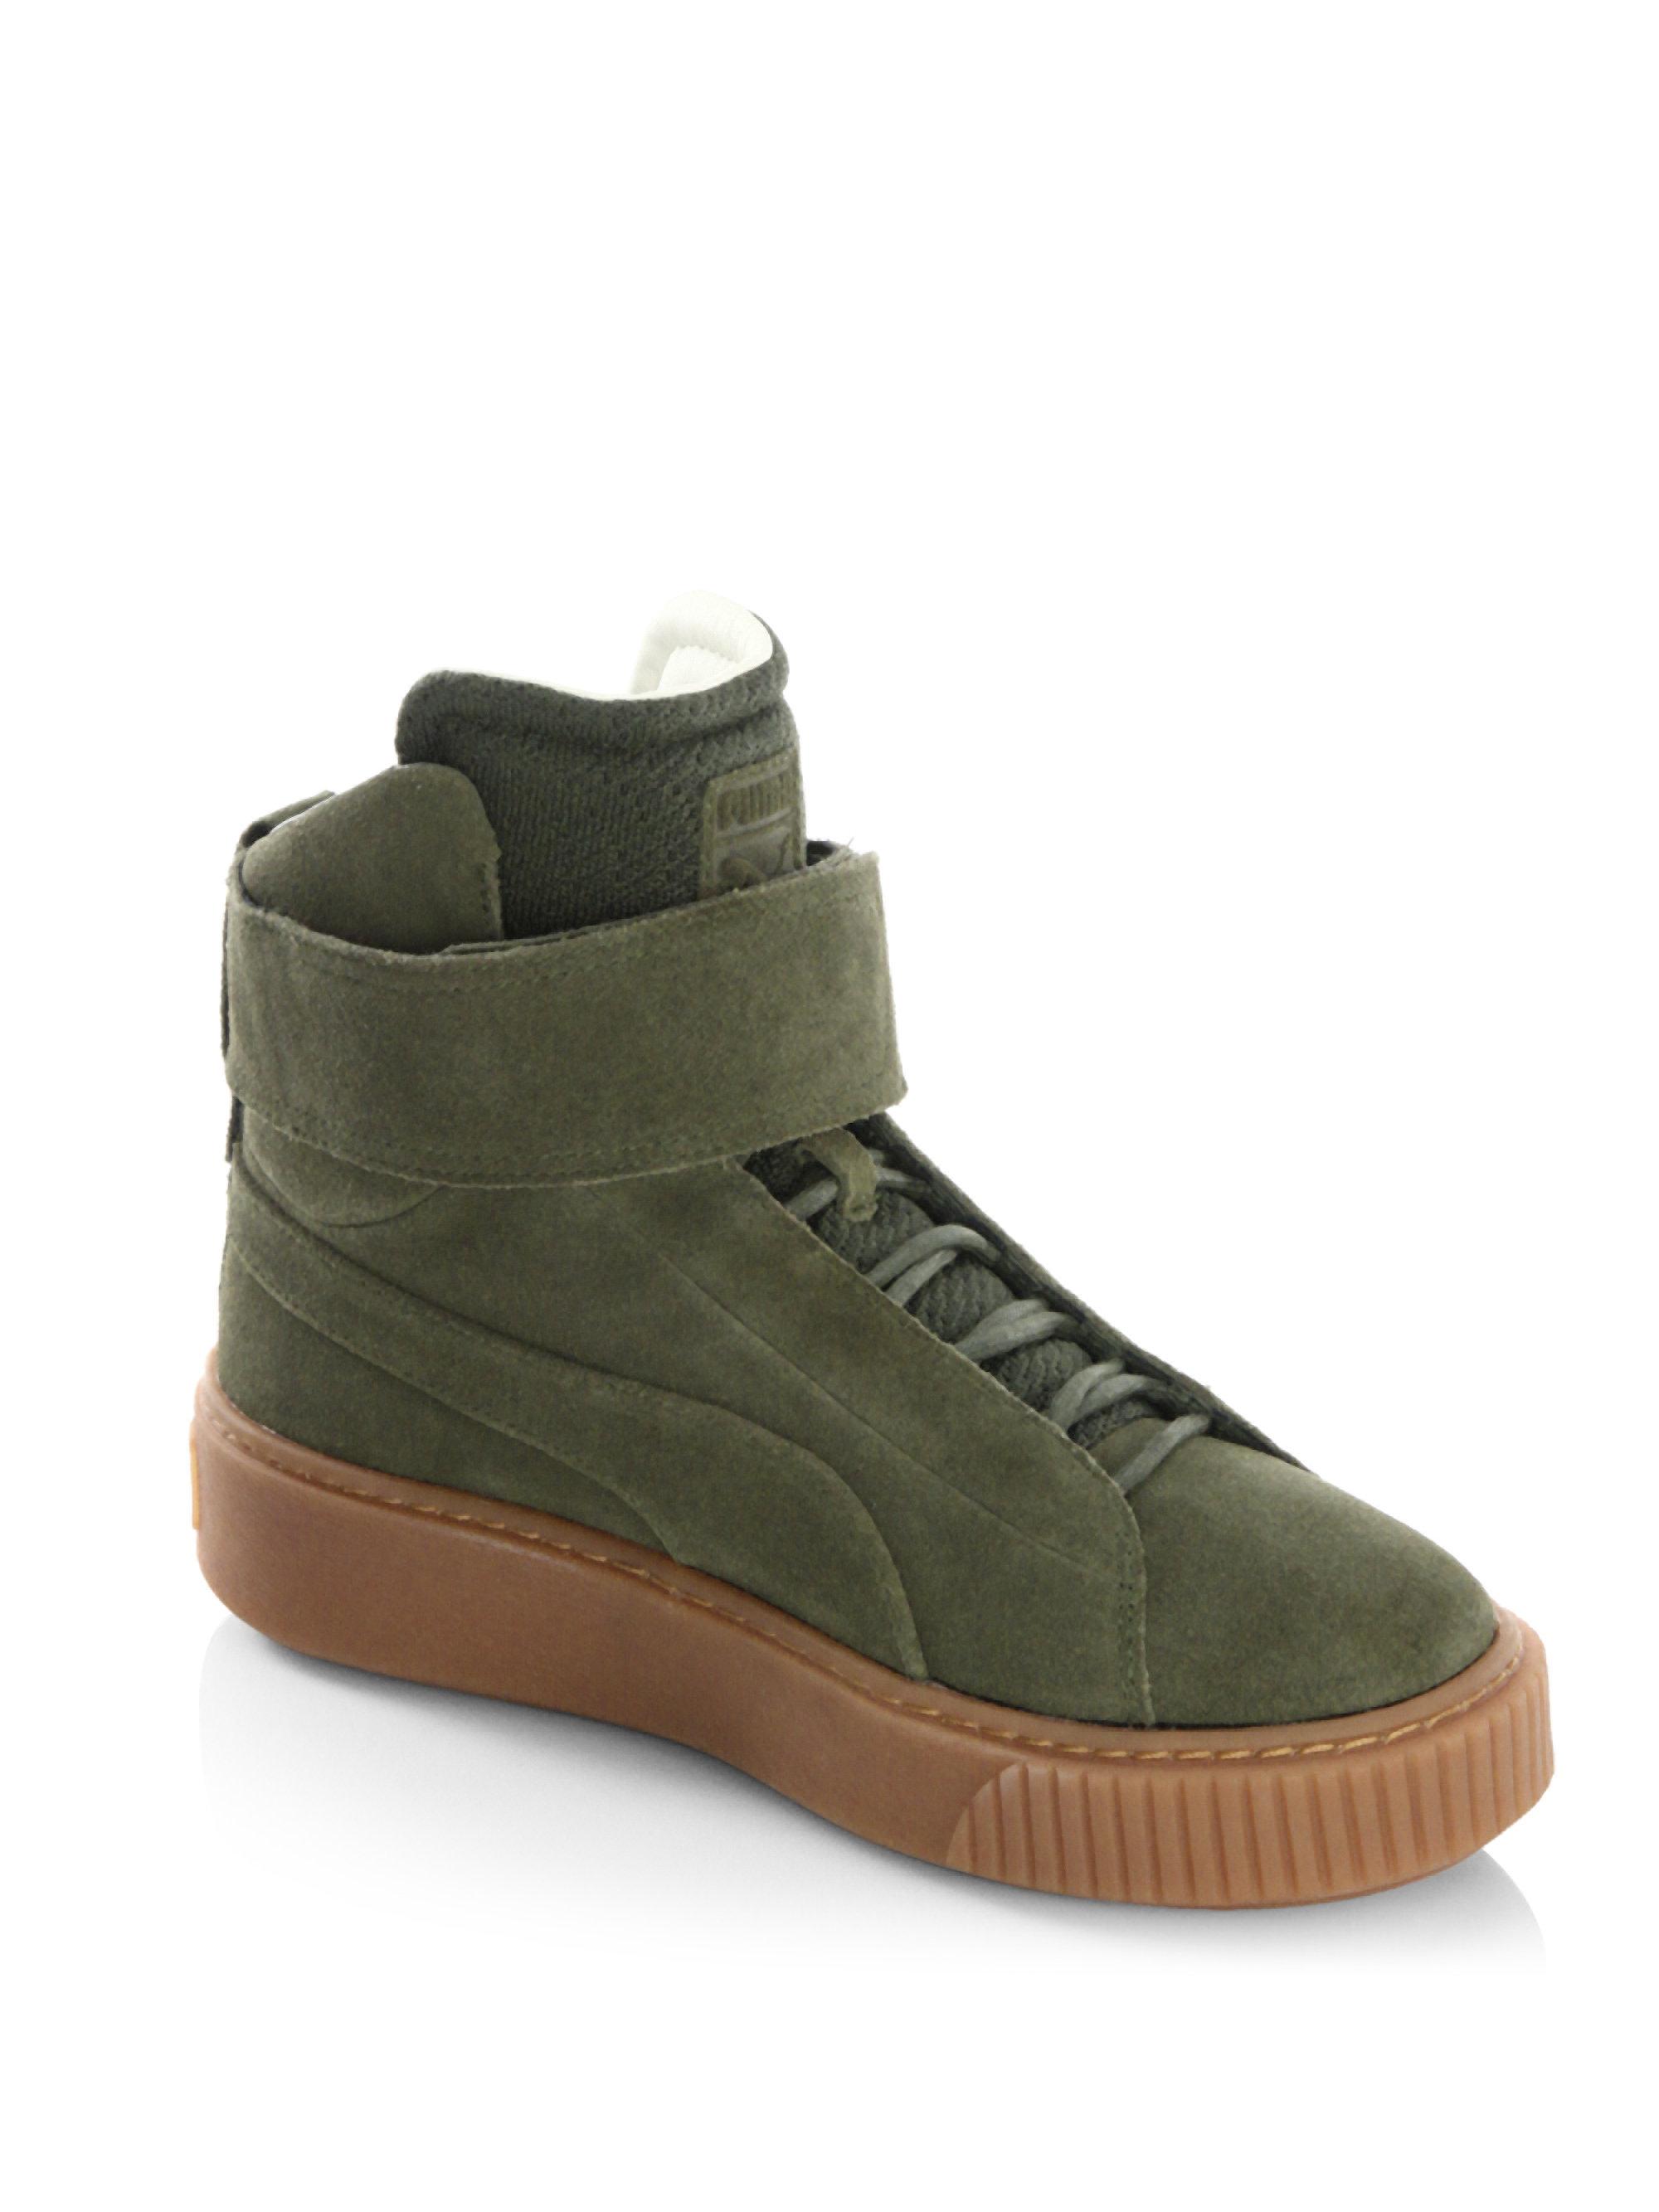 PUMA Suede Mid-top Sneakers in Olive Green (Green) for Men | Lyst